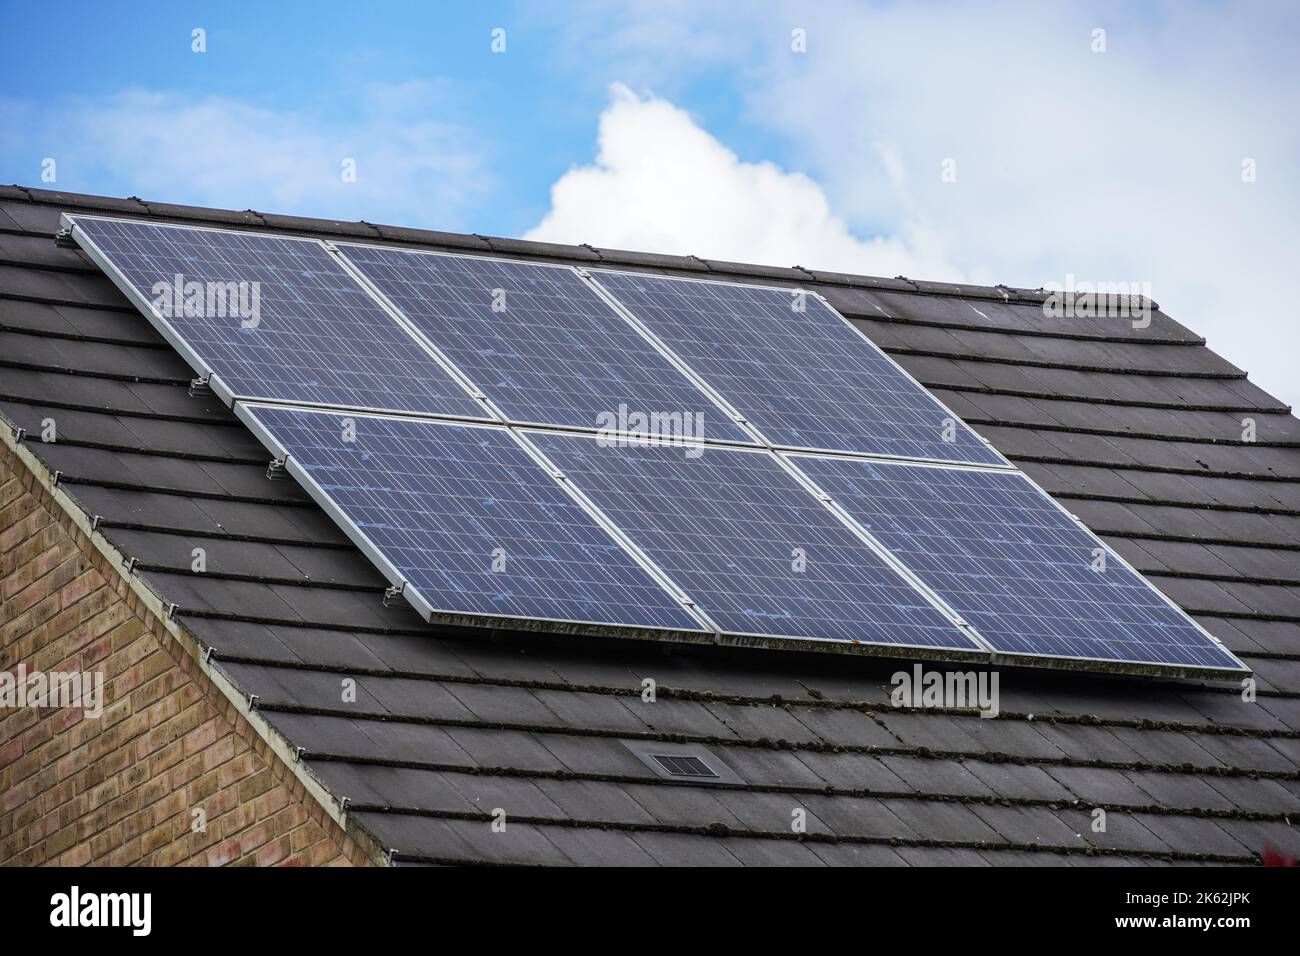 House with solar panels on the roof Stock Photo